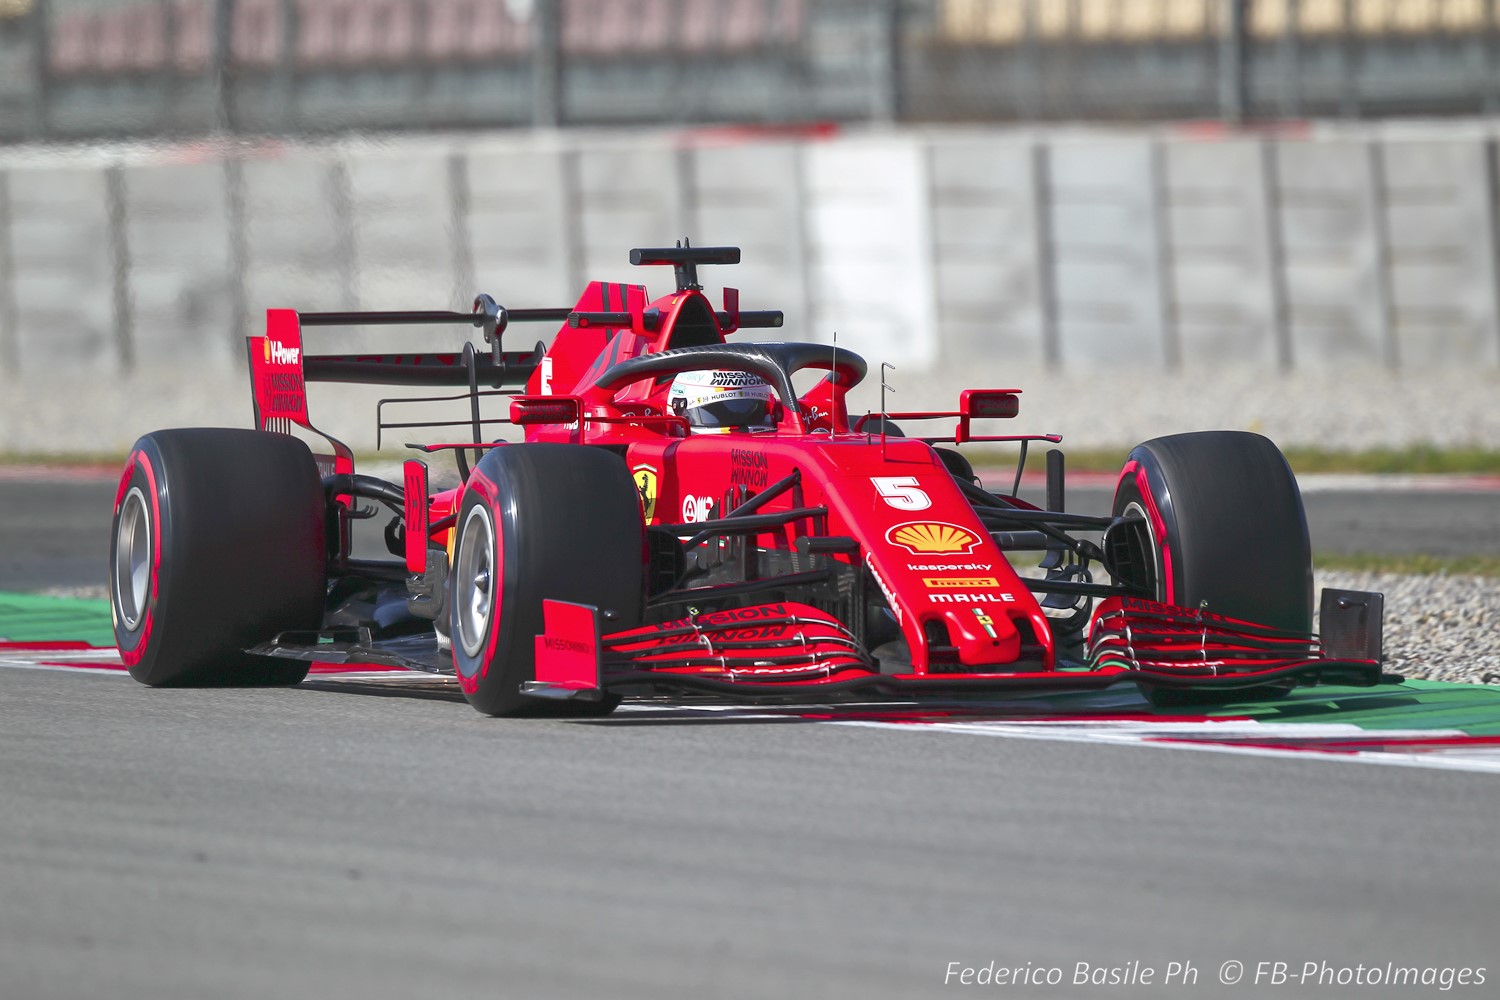 The fact the 2020 Ferrari was not quick in preseason testing had to weigh on Vettel's decision. Ferrari will never give him a championship winning car